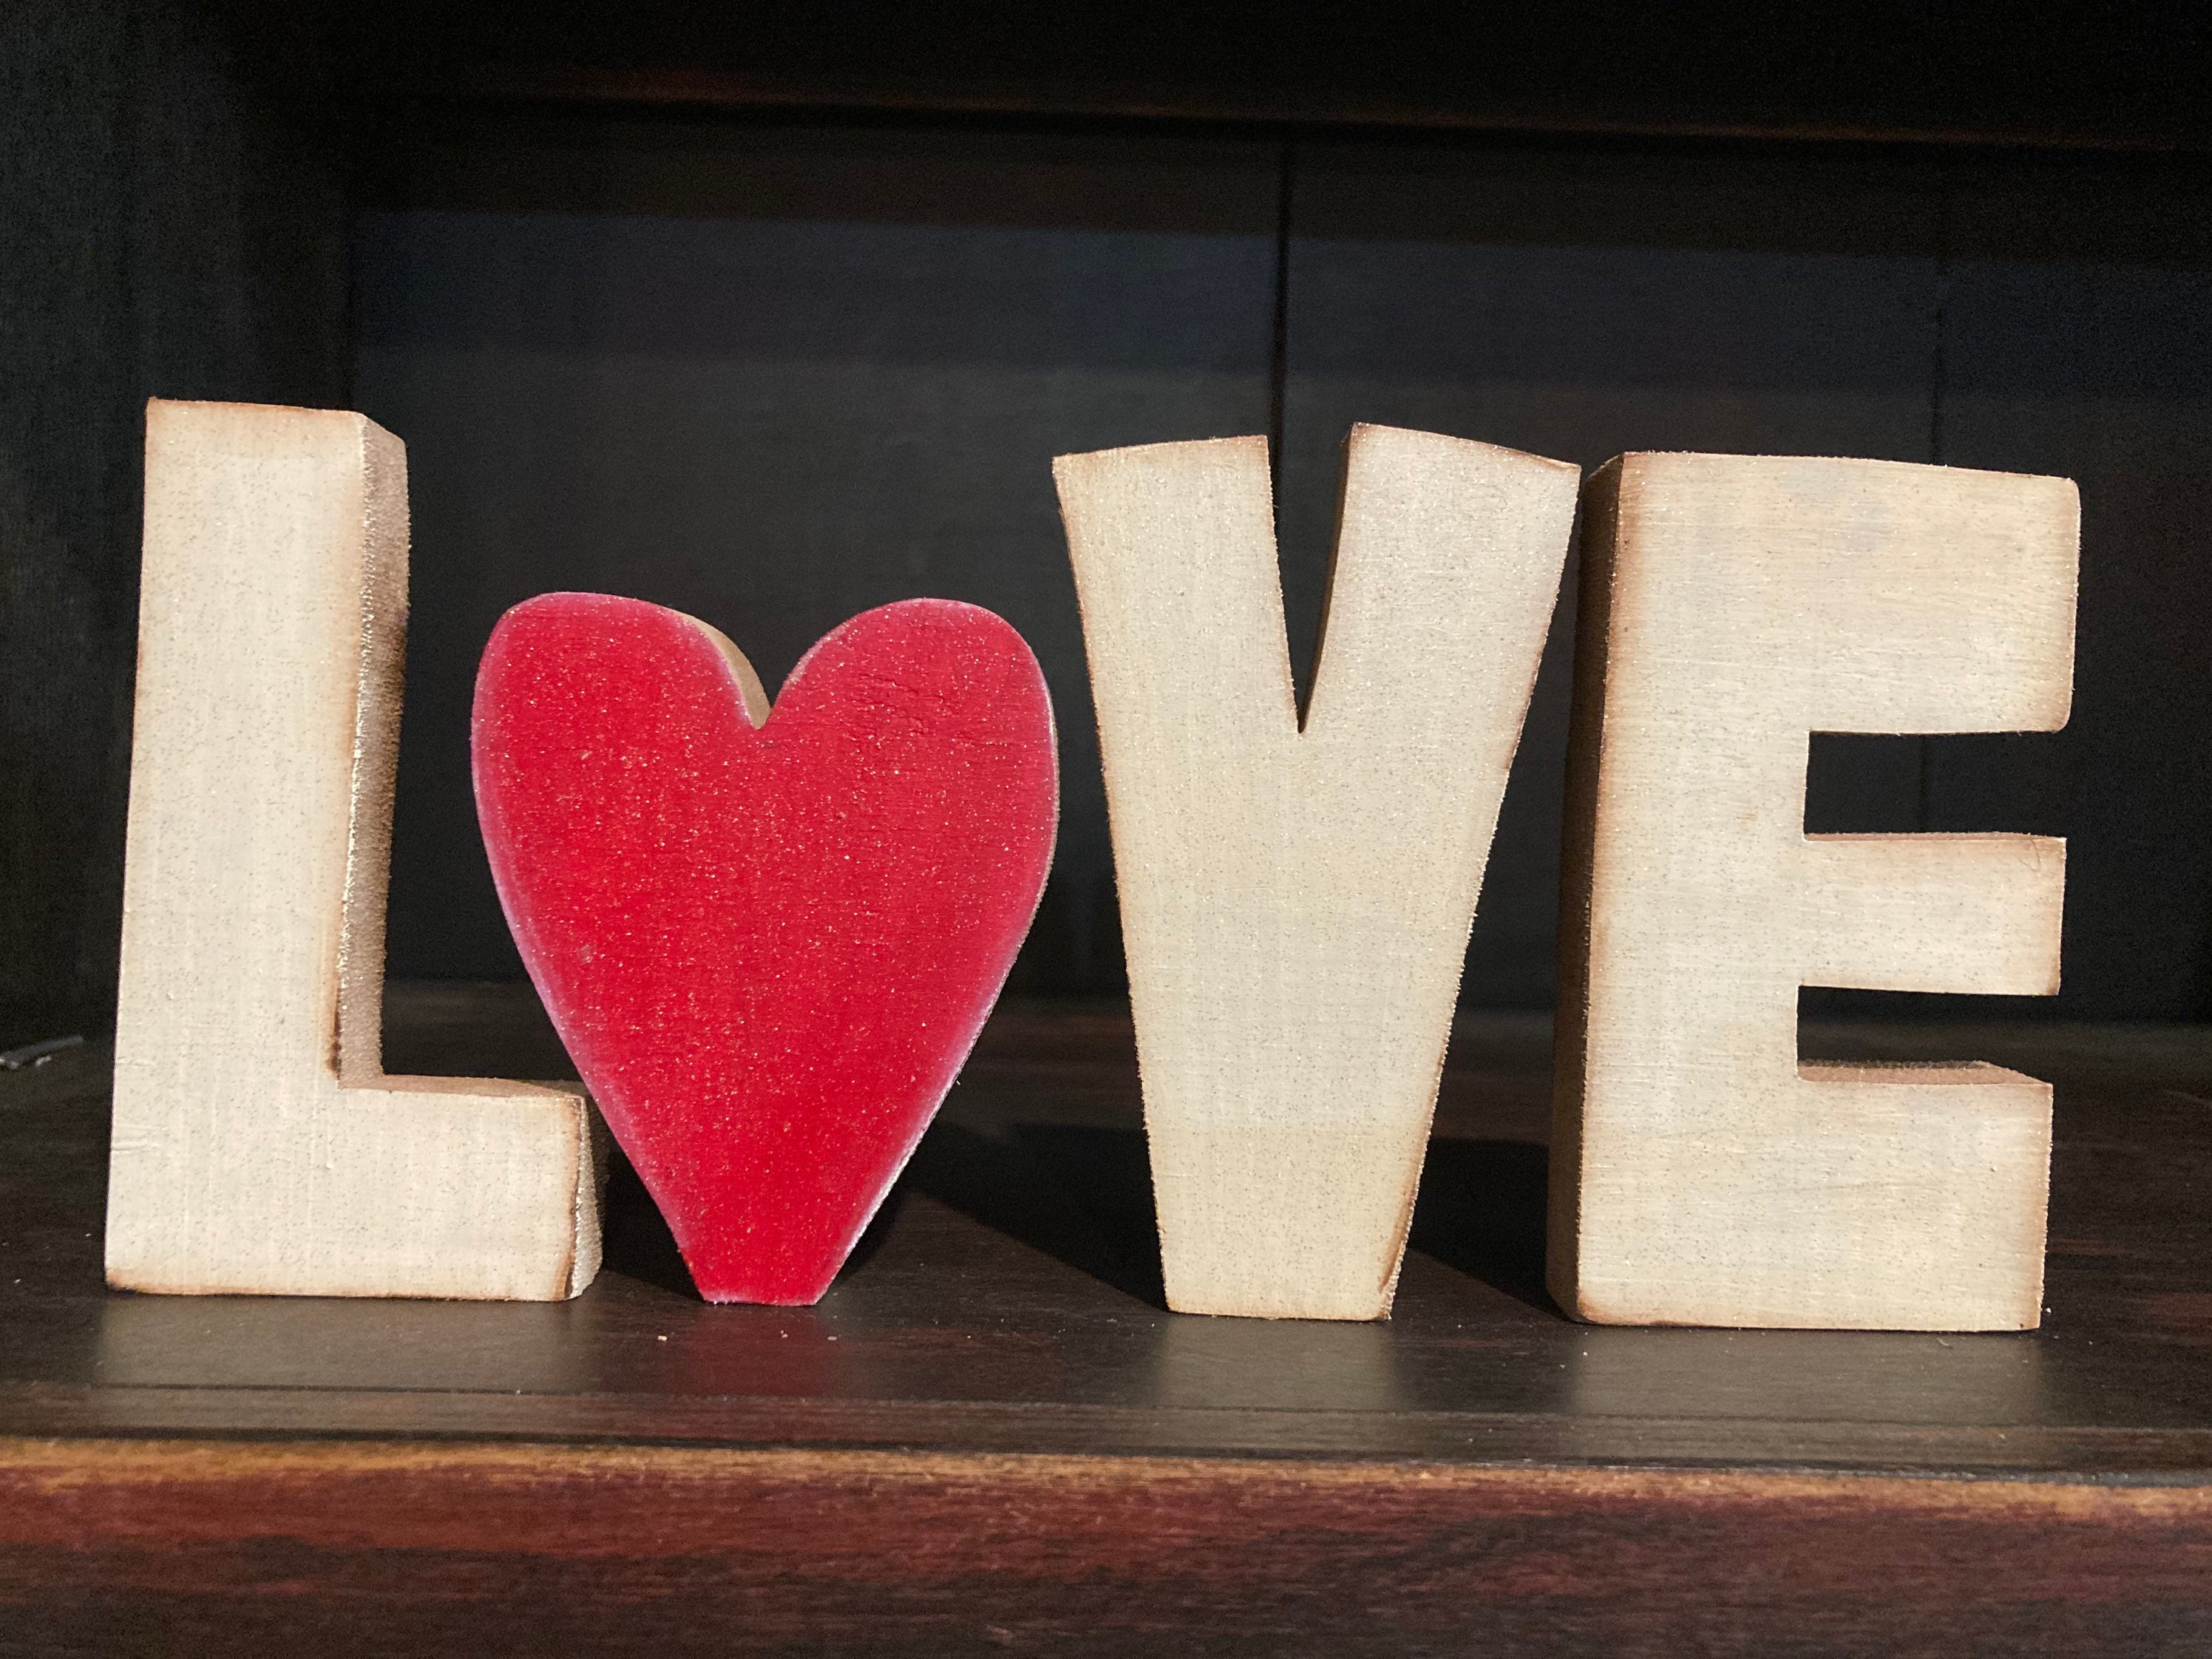 Decorative Letters Forming Word LOVE on Wooden Shelf on White Wall